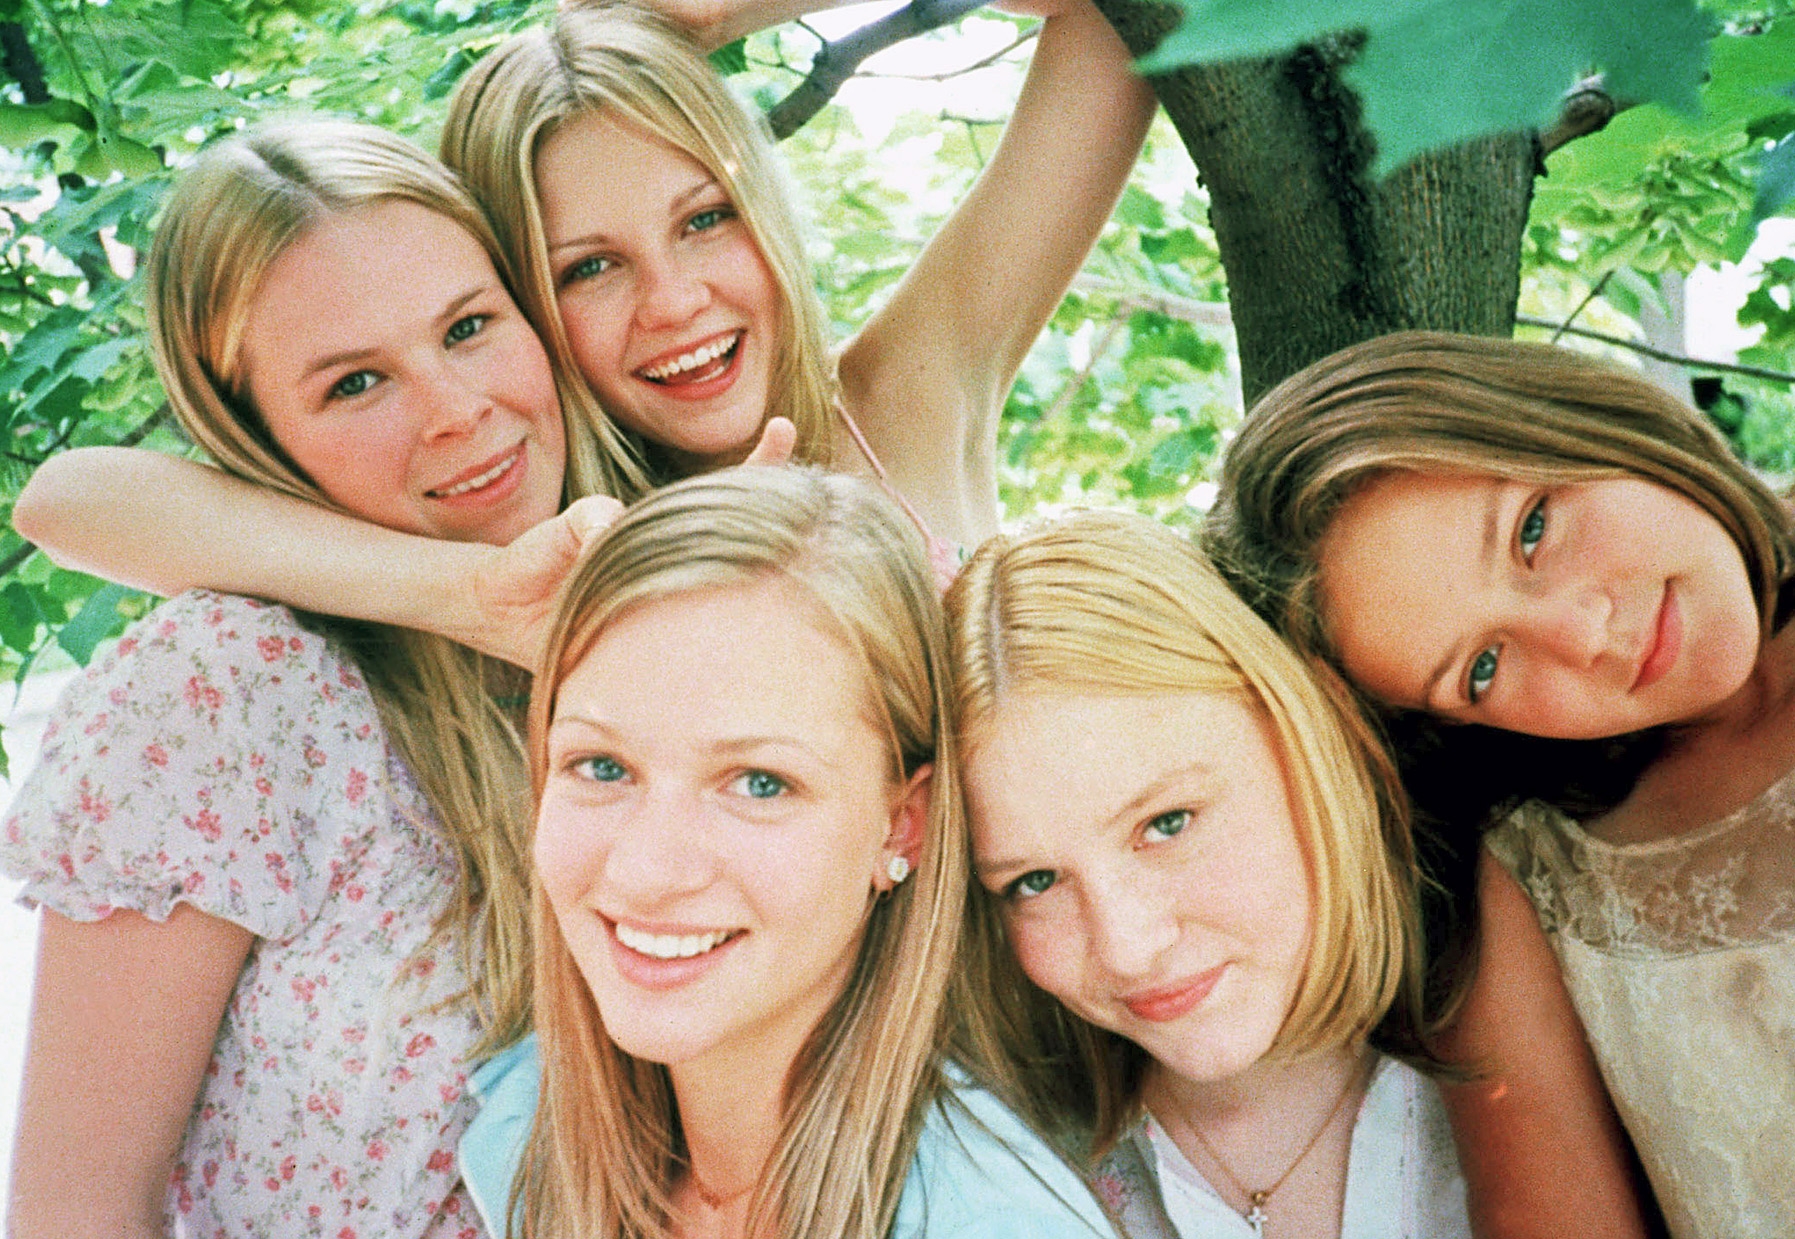 Image du film Virgin Suicides 7b5e07f1-6b6c-4c57-b638-f6117b65bf86